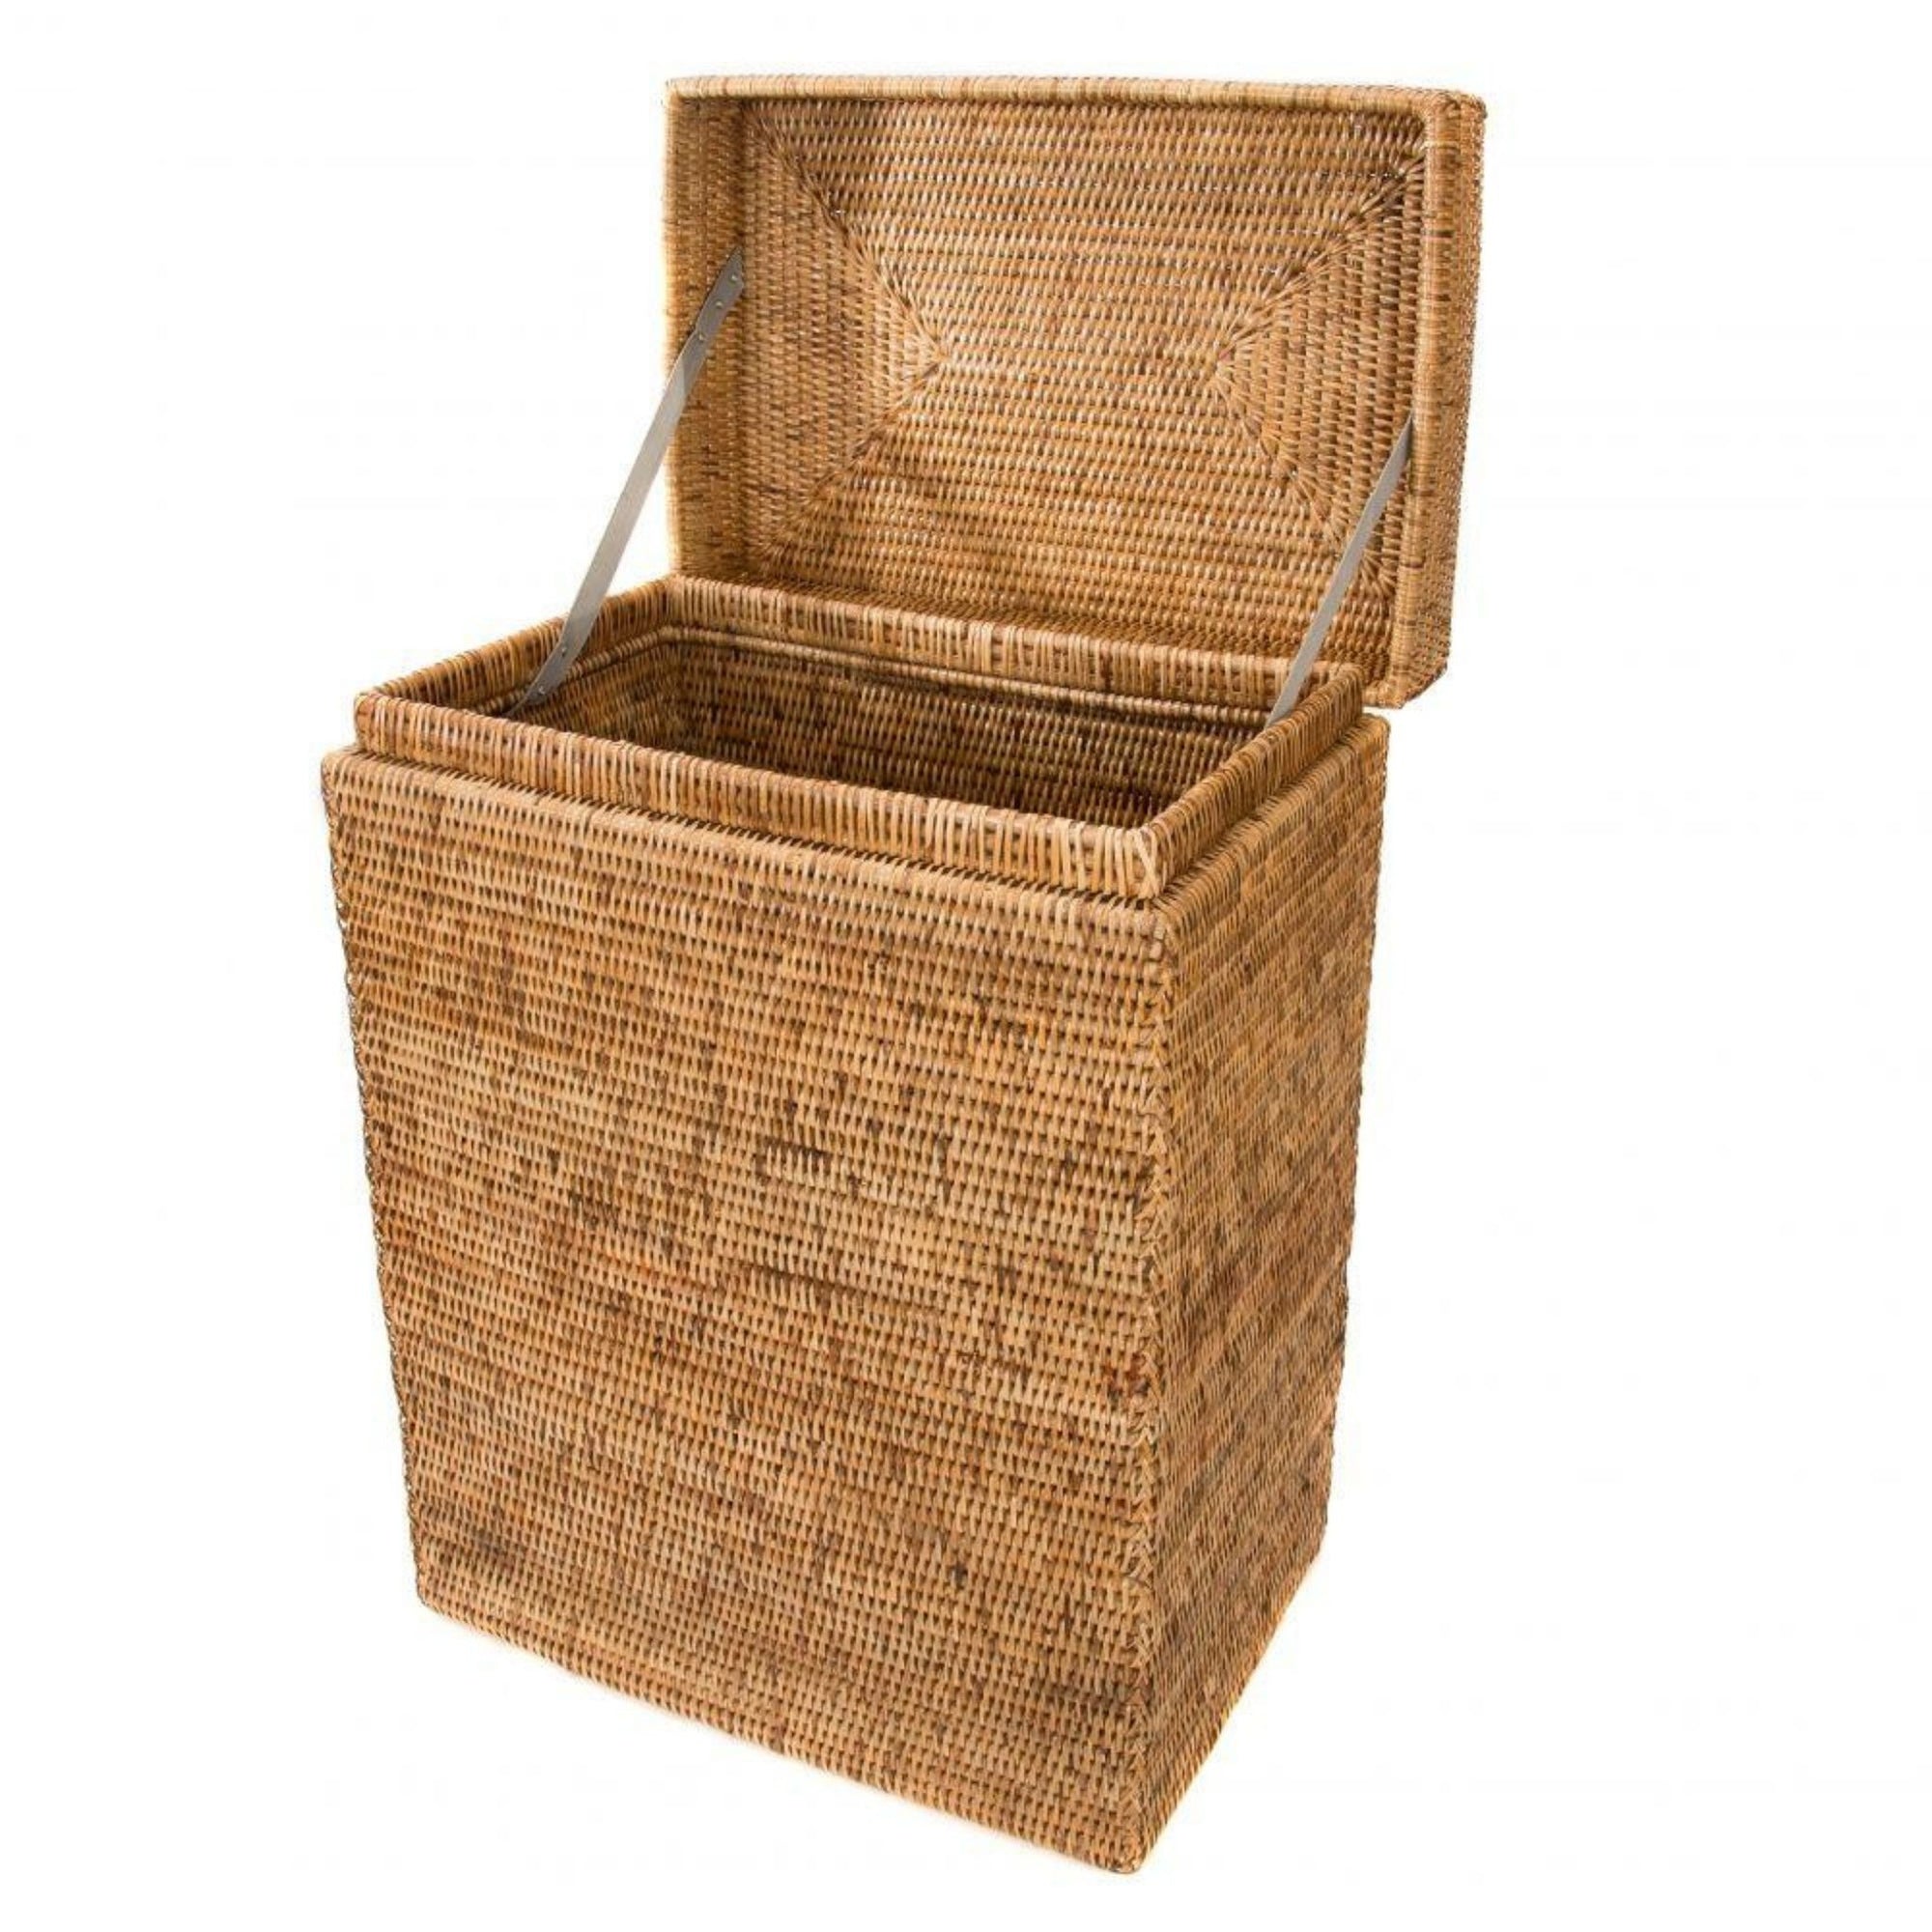 Hamper with Hinged Lid